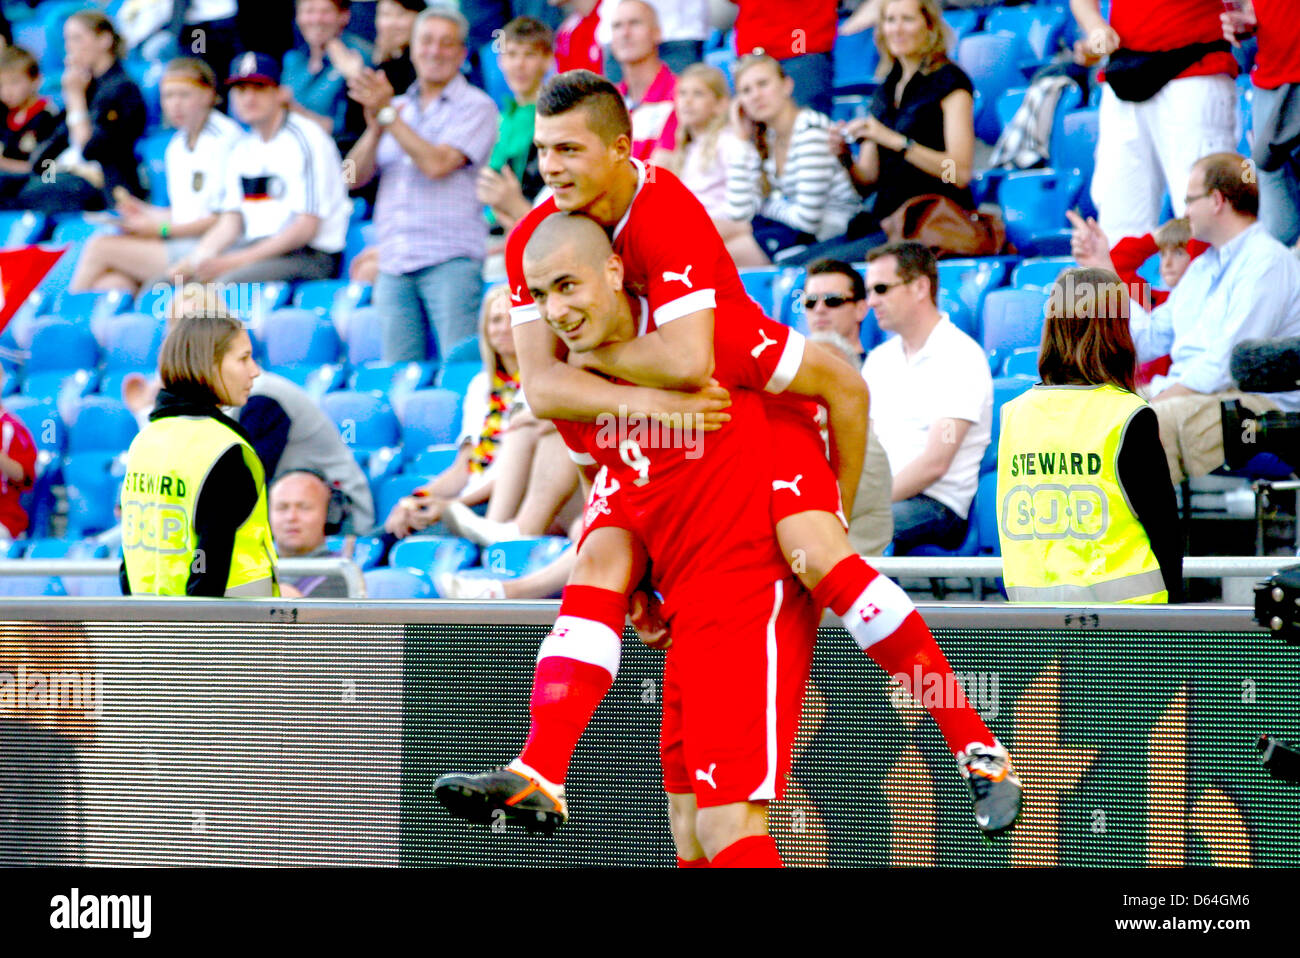 Goalscorer Eren Derdiyok (front) and Granit Xhaka (back) of the Swiss national soccer team cheer after the 3-1 goal during the soccer match between Germany and Switzerland at St Jakob Park in Basel, Switzerland, 26 May 2012. Photo: Revierfoto Stock Photo